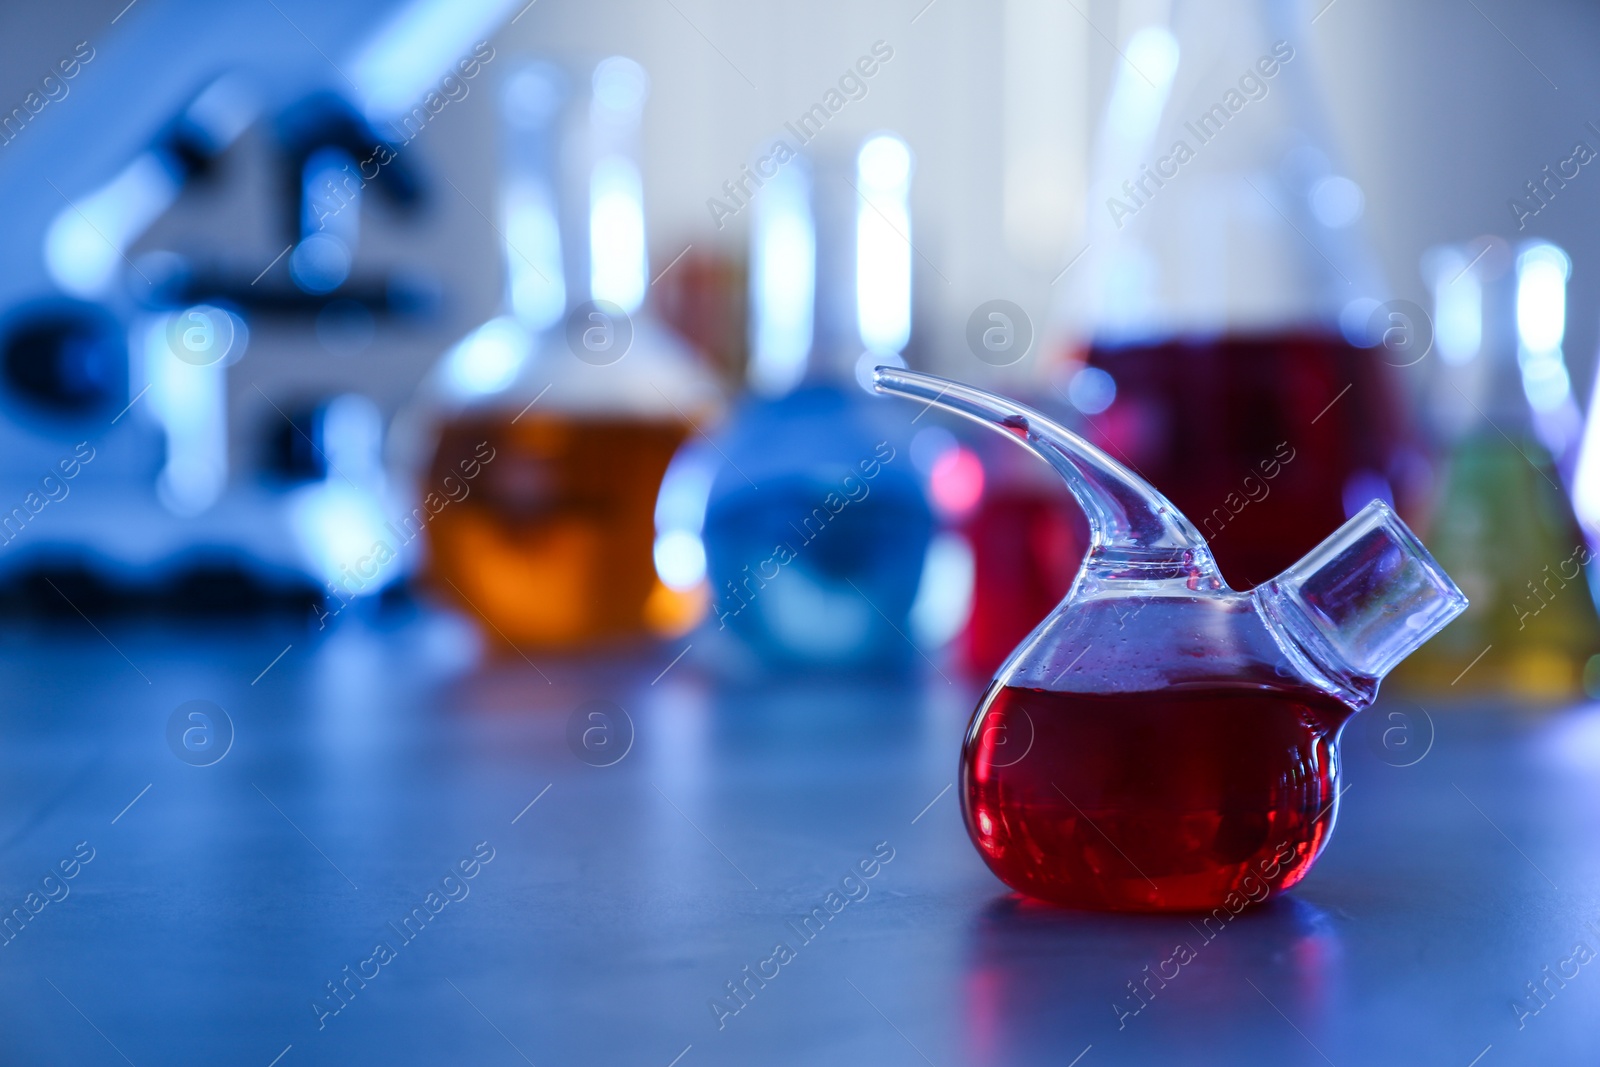 Photo of Retort flask on table against blurred background, space for text.  Chemistry glassware